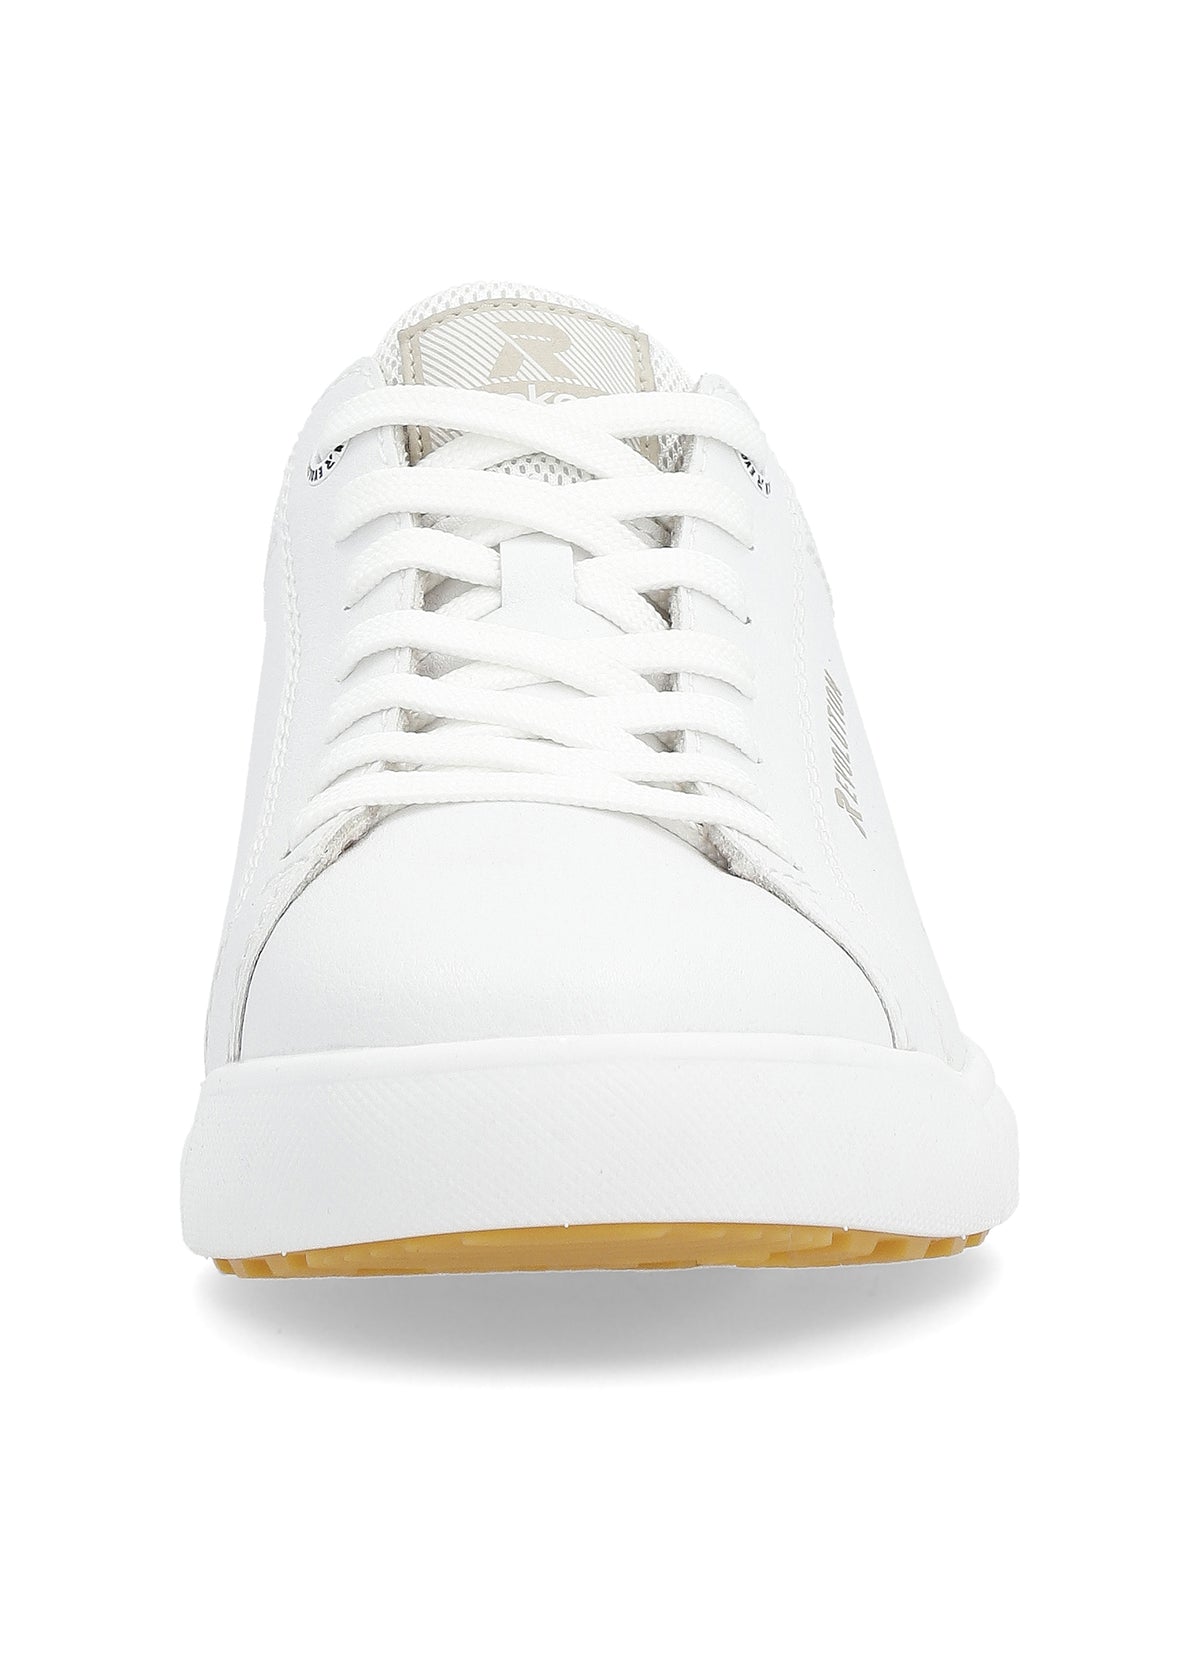 Leather sneakers - white, wider last, Rieker Evolution